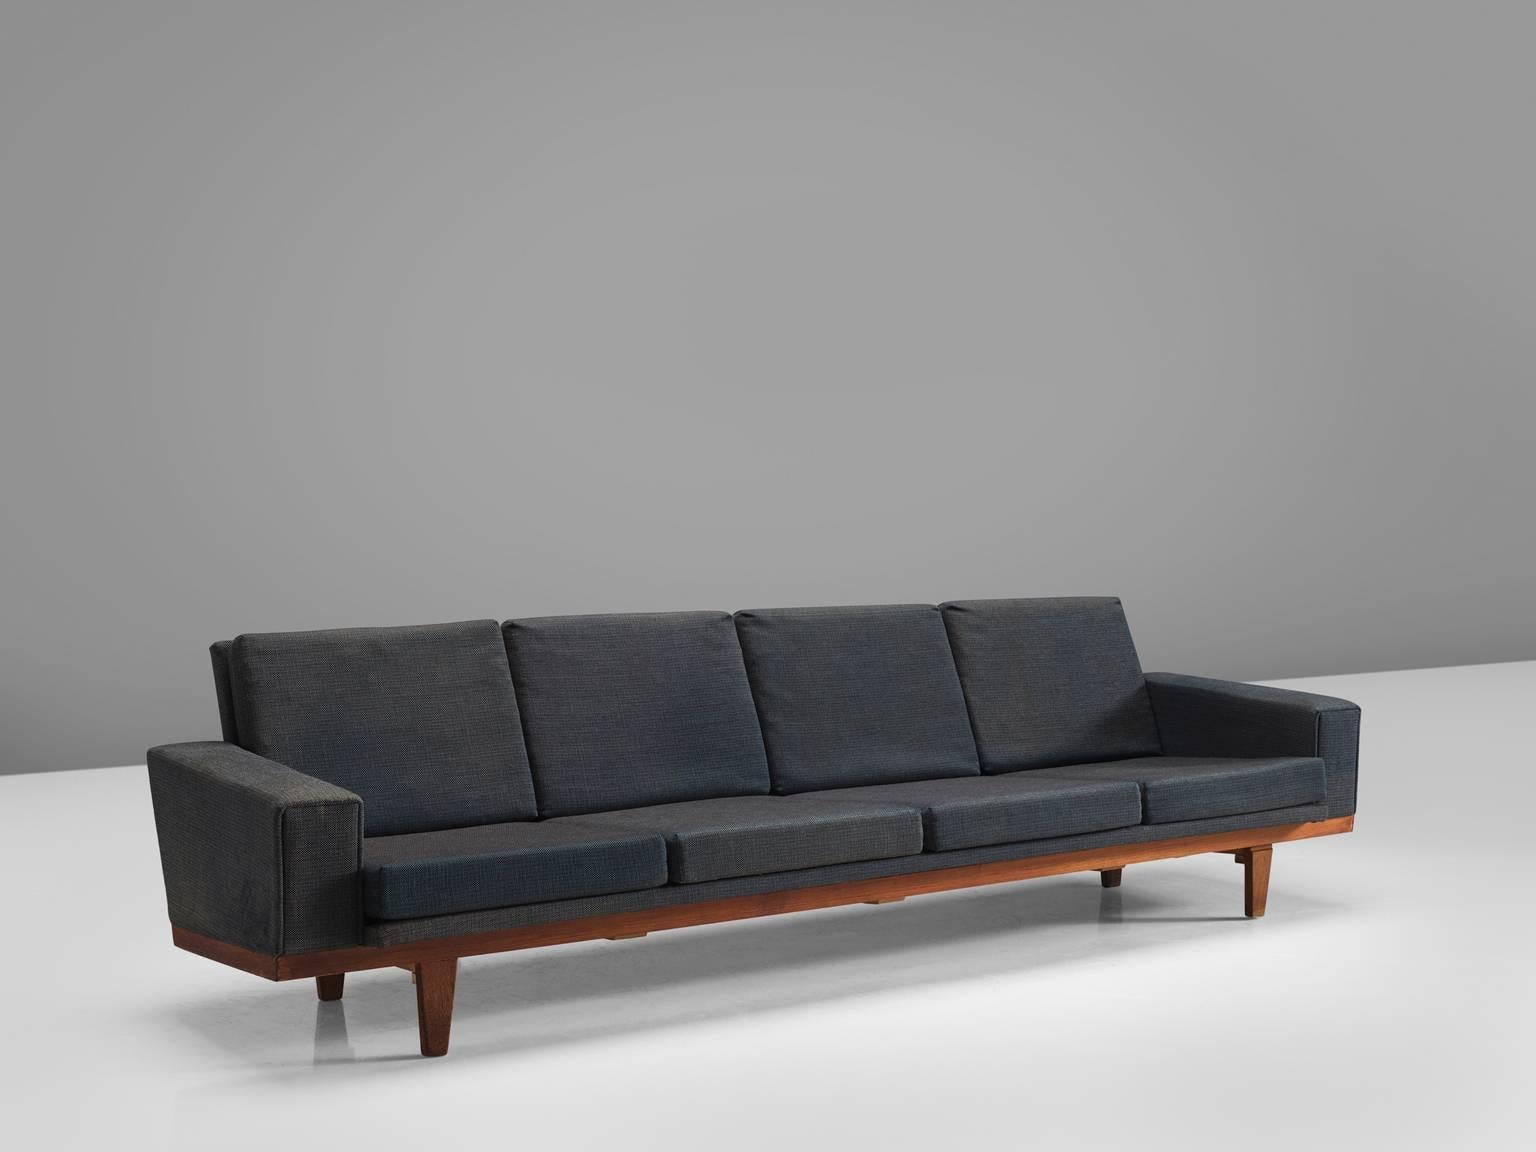 Sofa, grey blue fabric, teak, Denmark, 1960s

This sofa is executed in with thick grey blue fabric. The seat and back are both smoothly upholstered and complement the teak frame wonderfully. The legs slightly tapered and sturdy and flat. The sofa